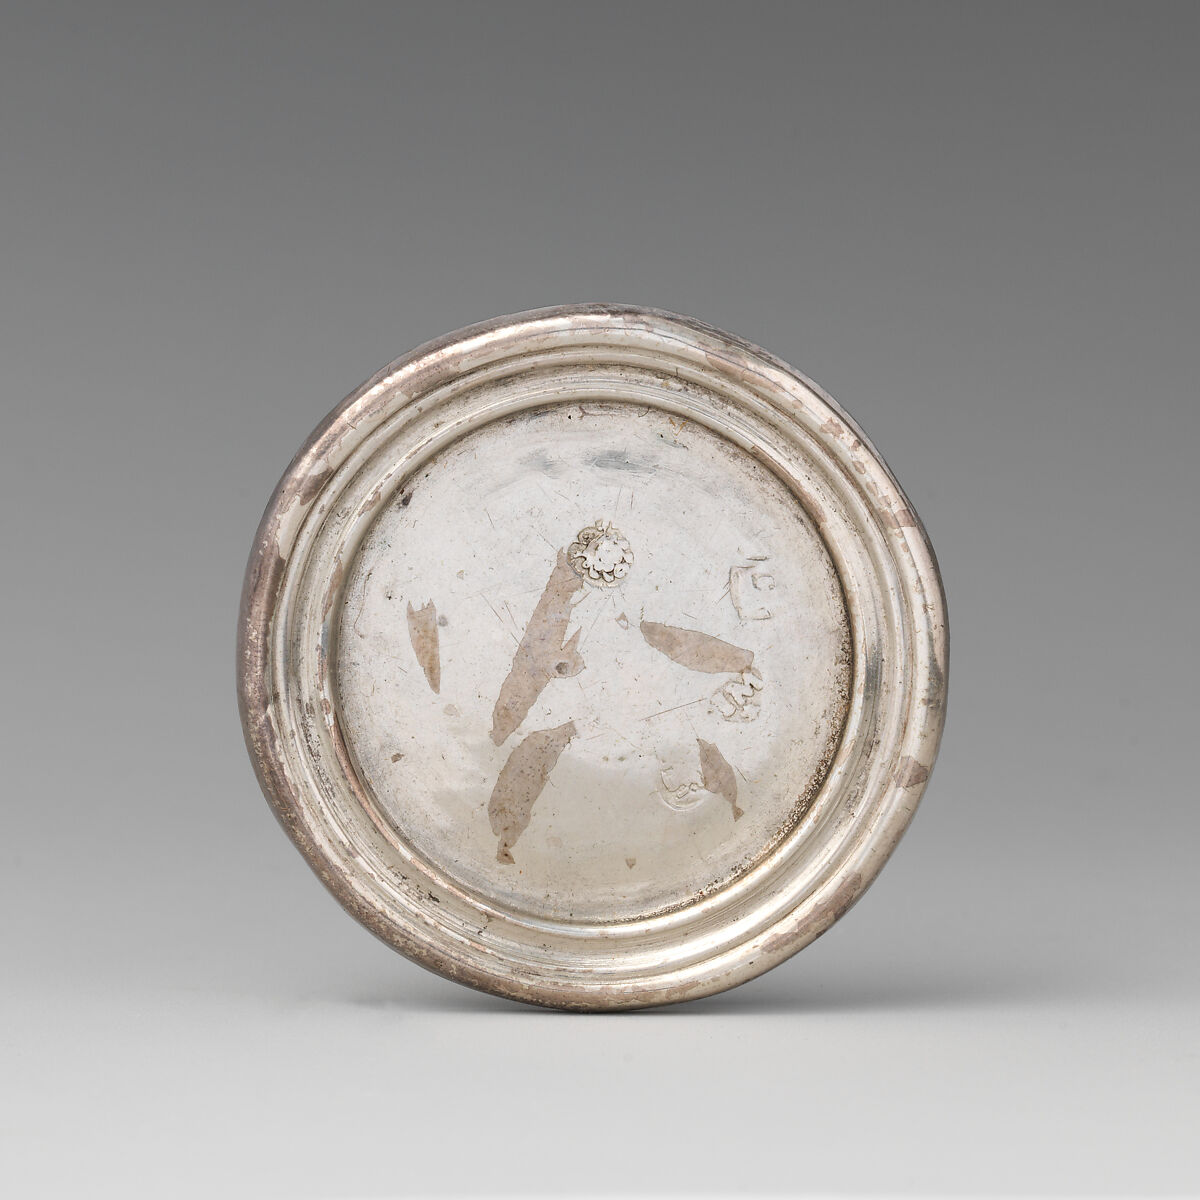 Miniature tray, I. M. (active London, early-mid 18th century), Silver, British, London 